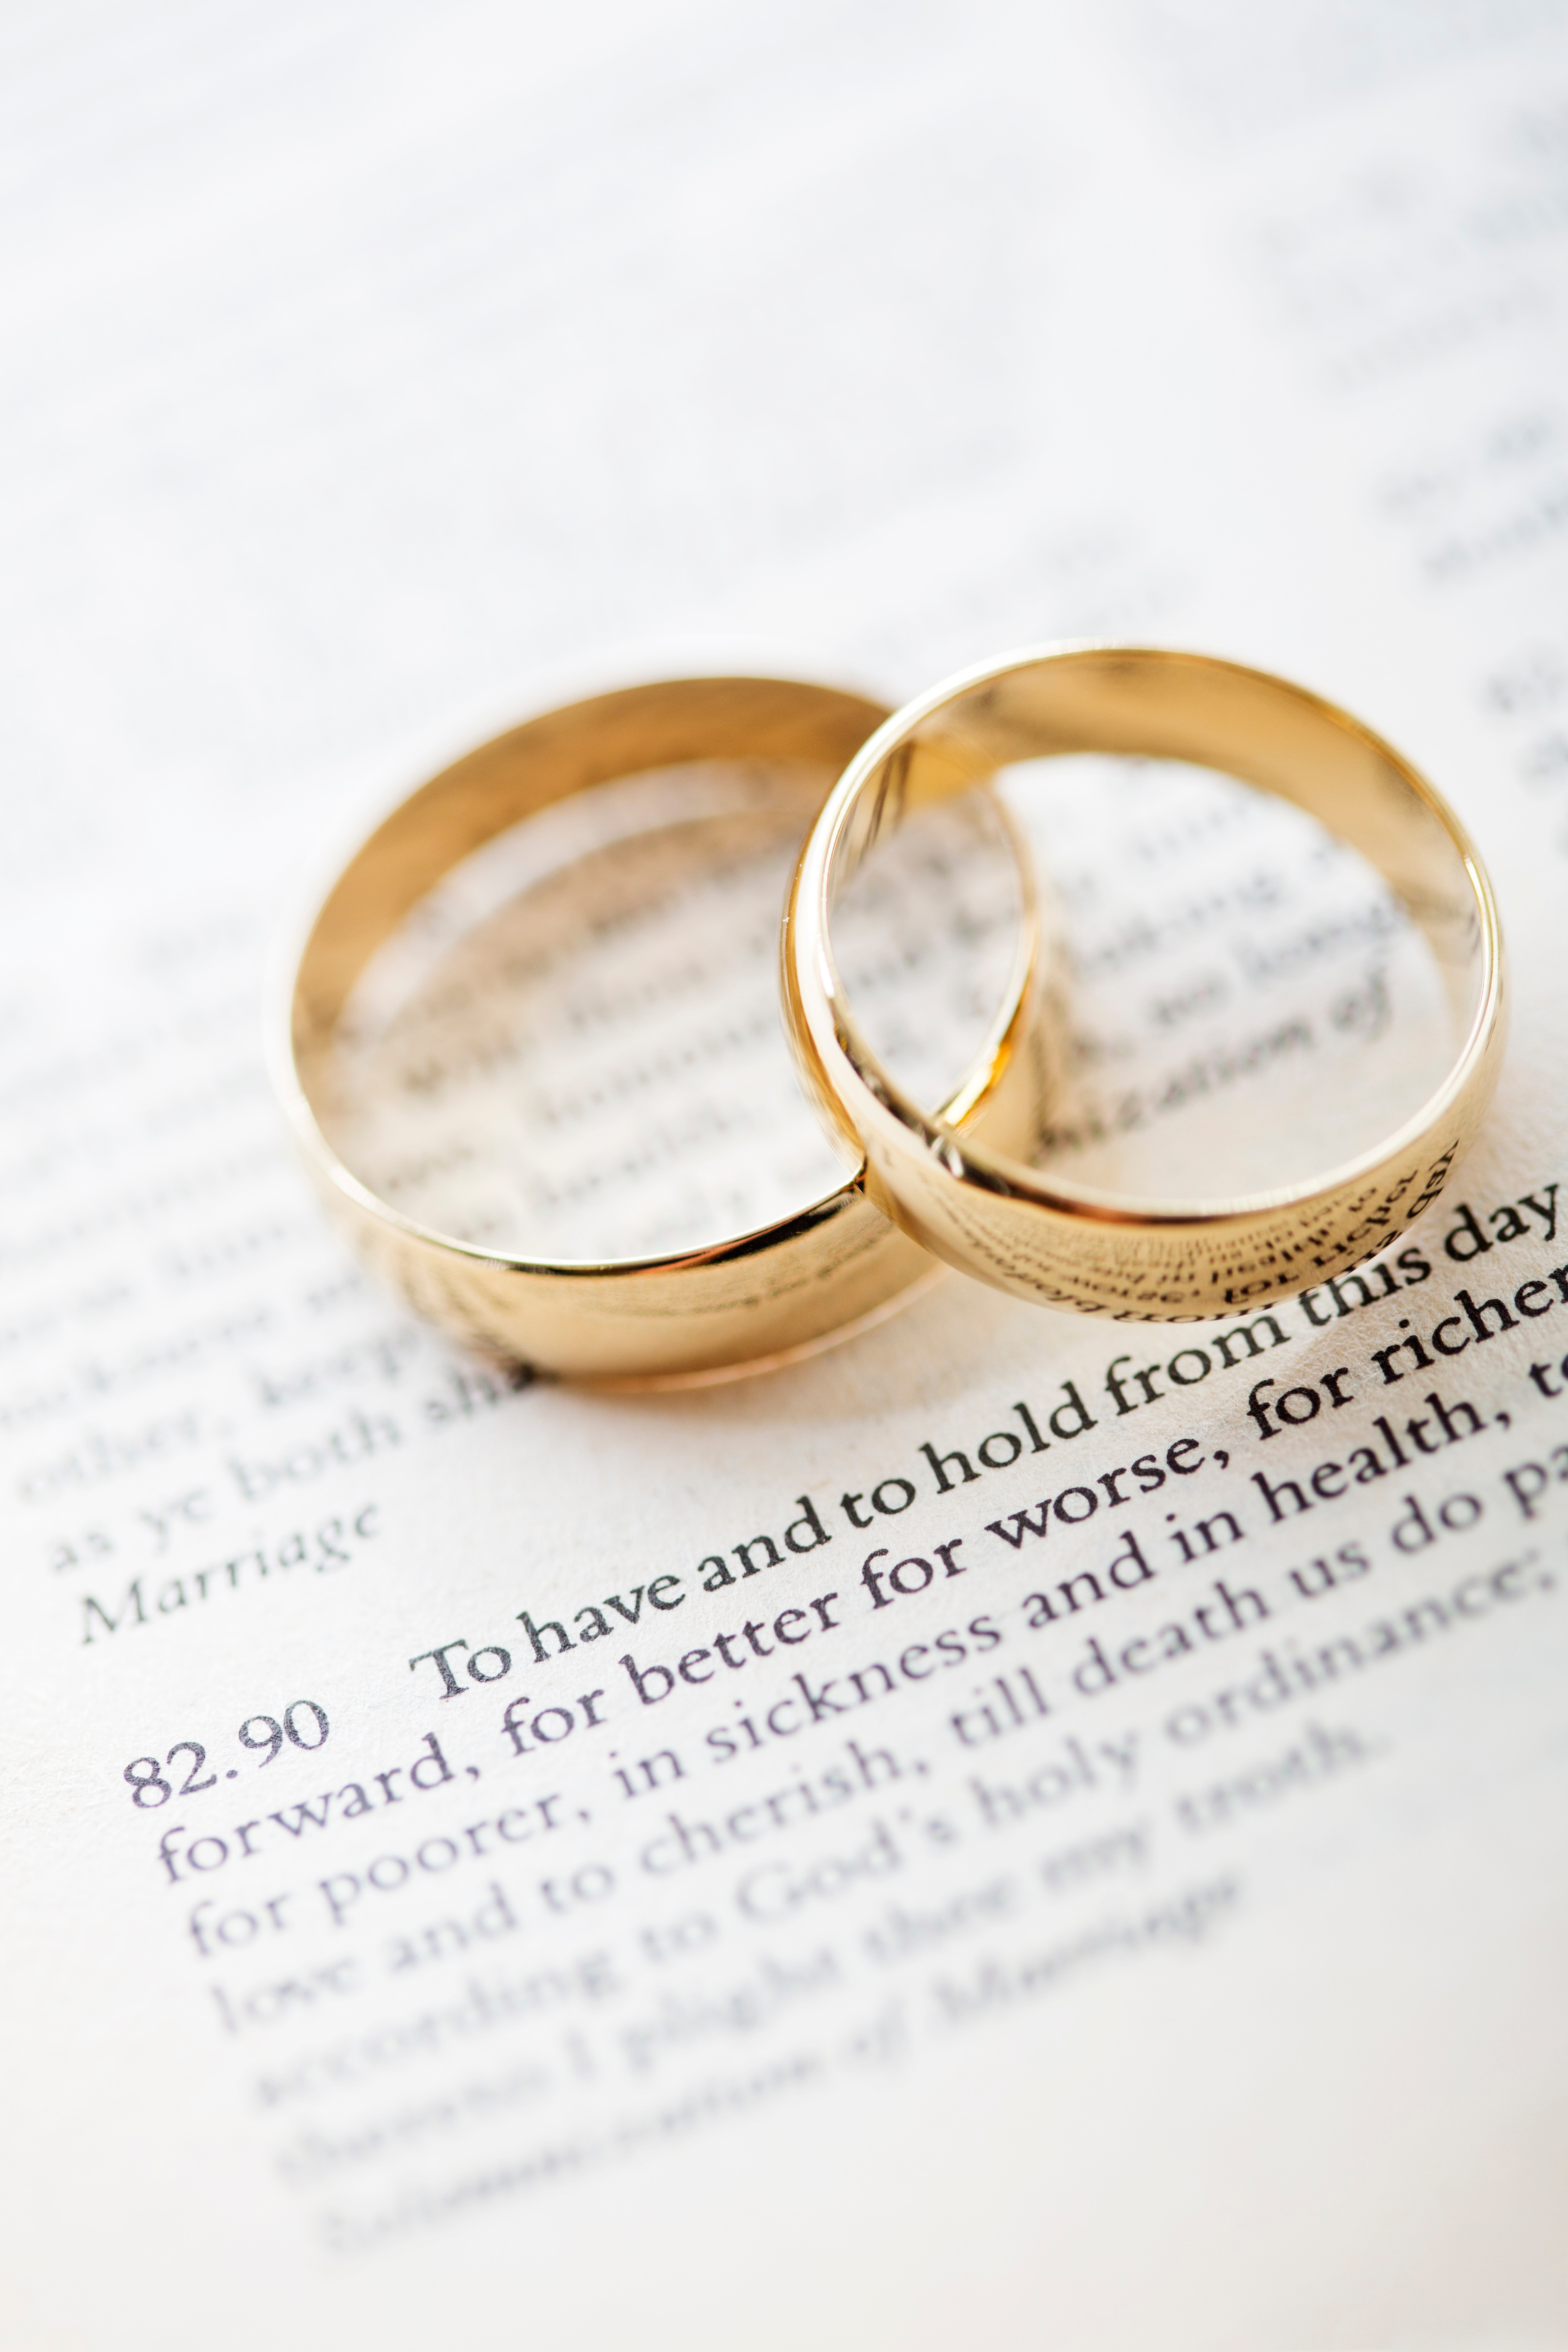 Wedding Vows and Rings